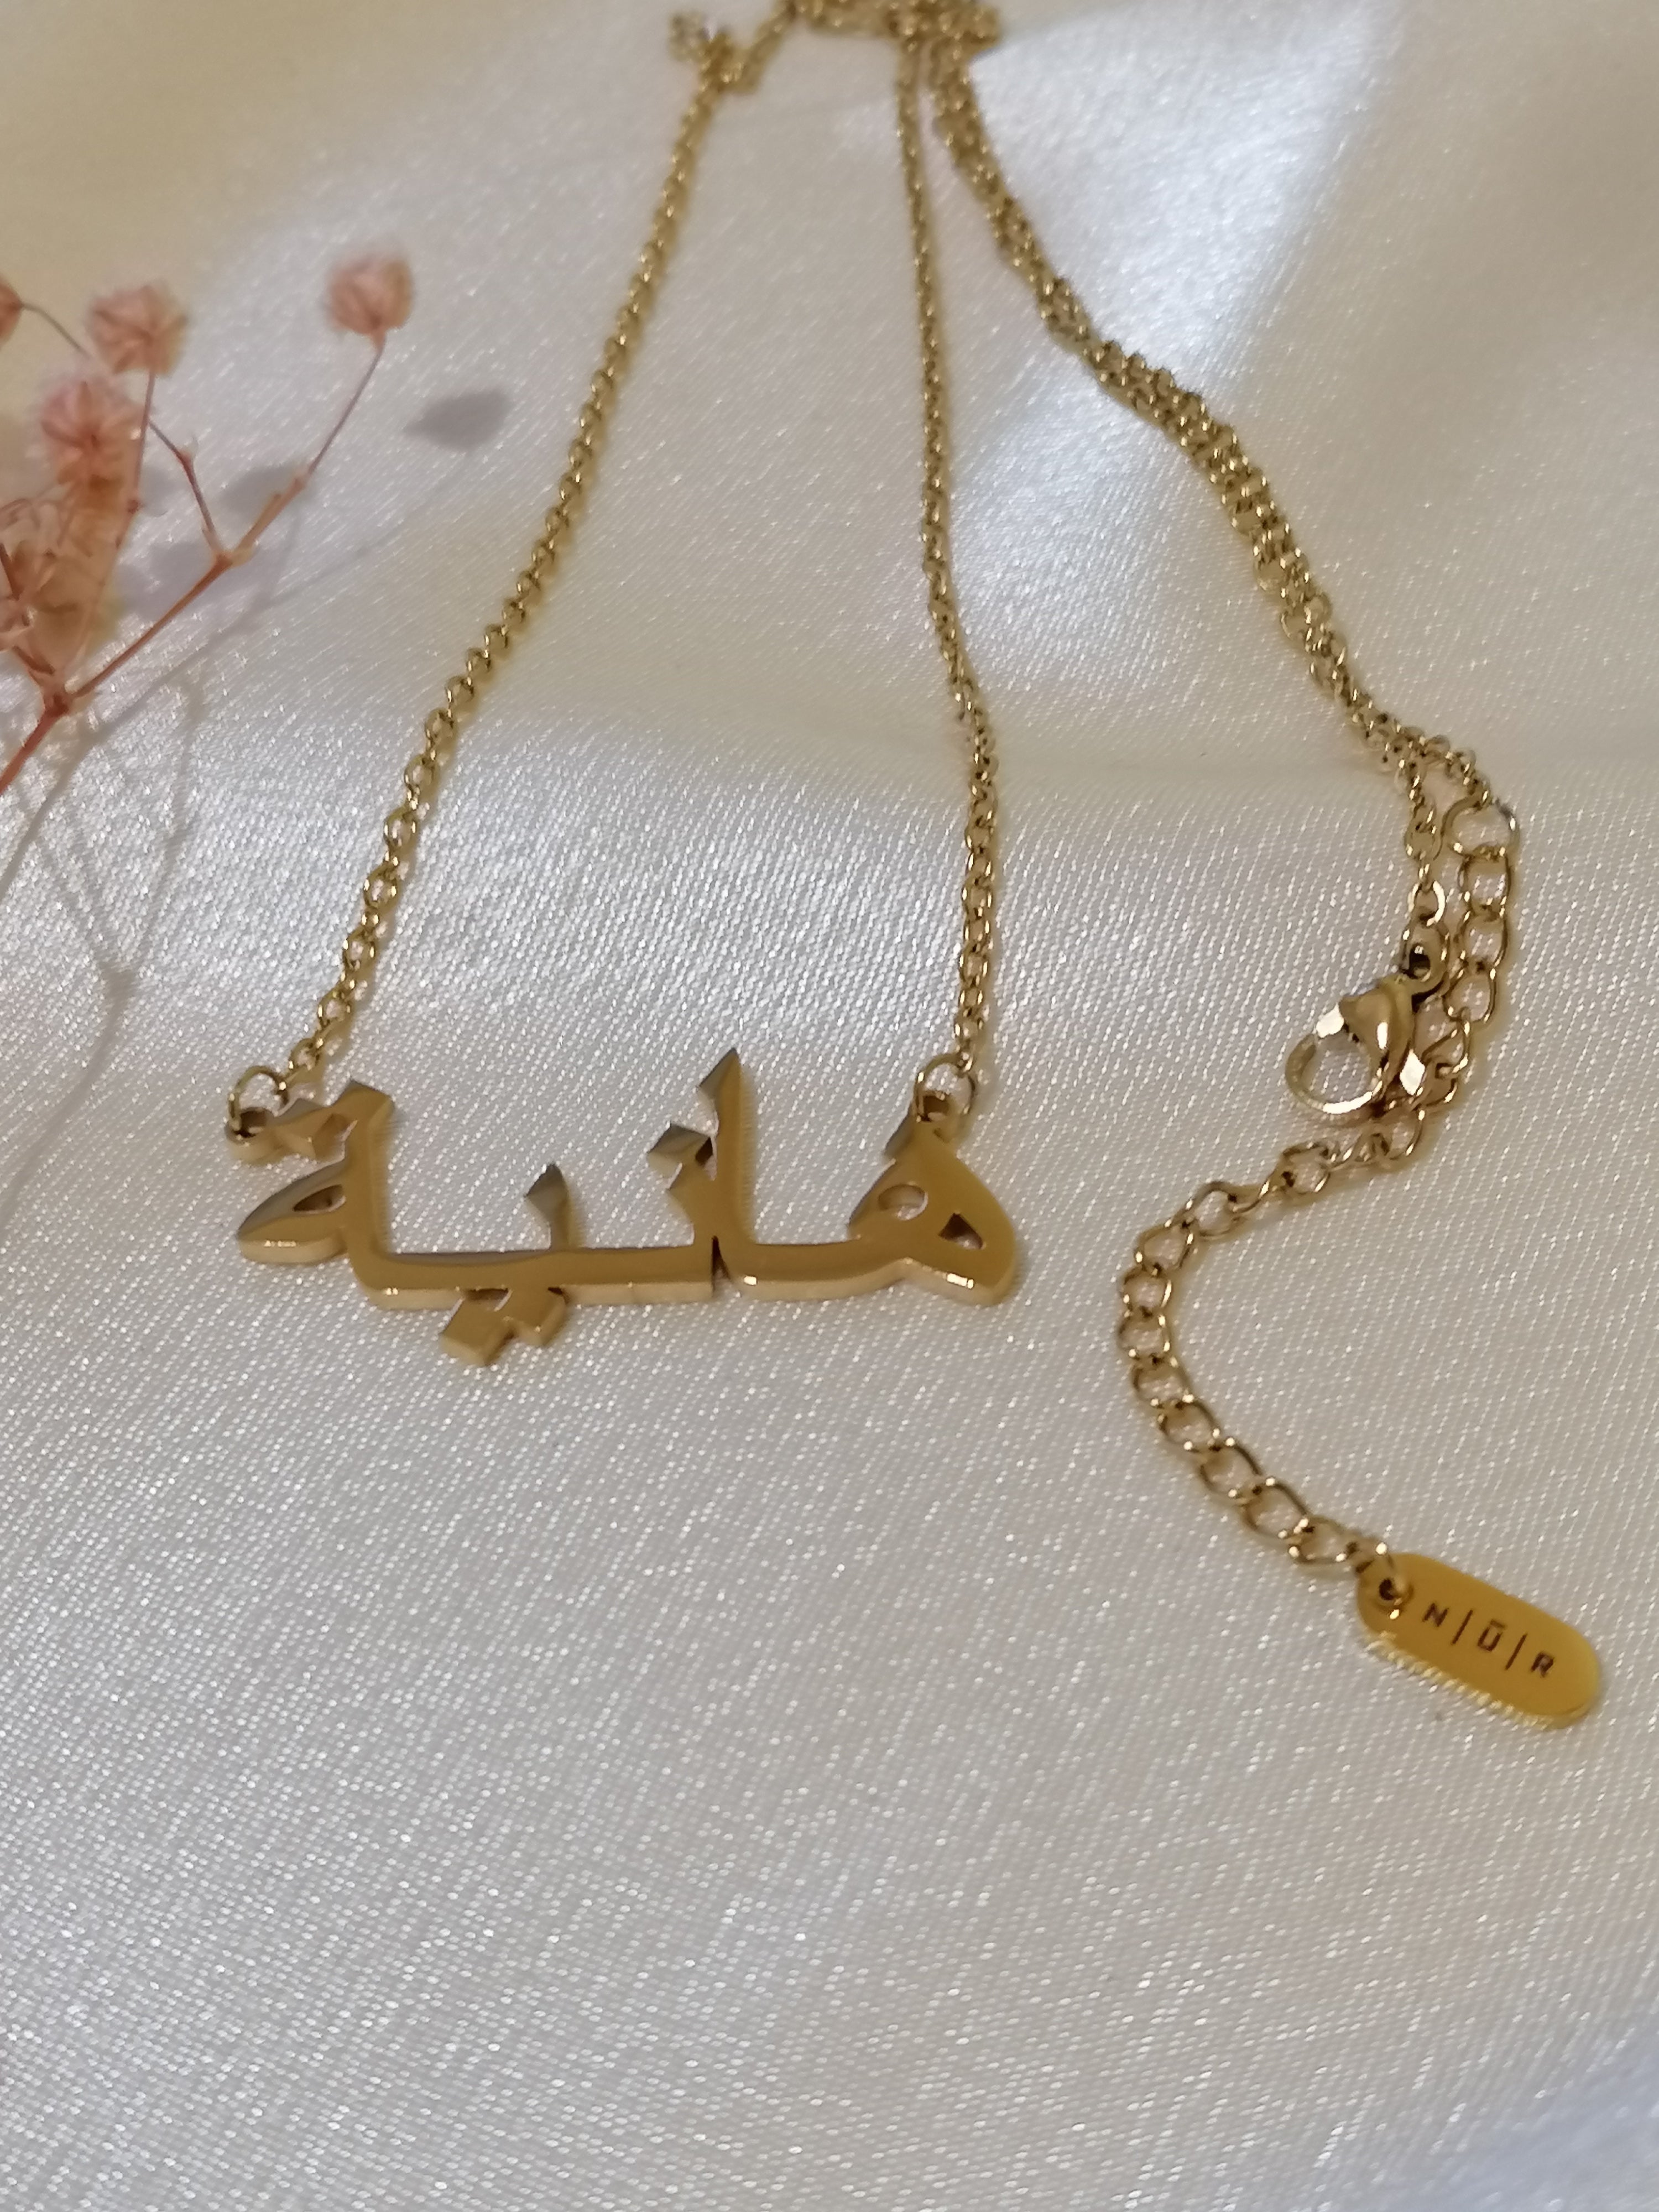 Arabic Name Necklace (Gold)